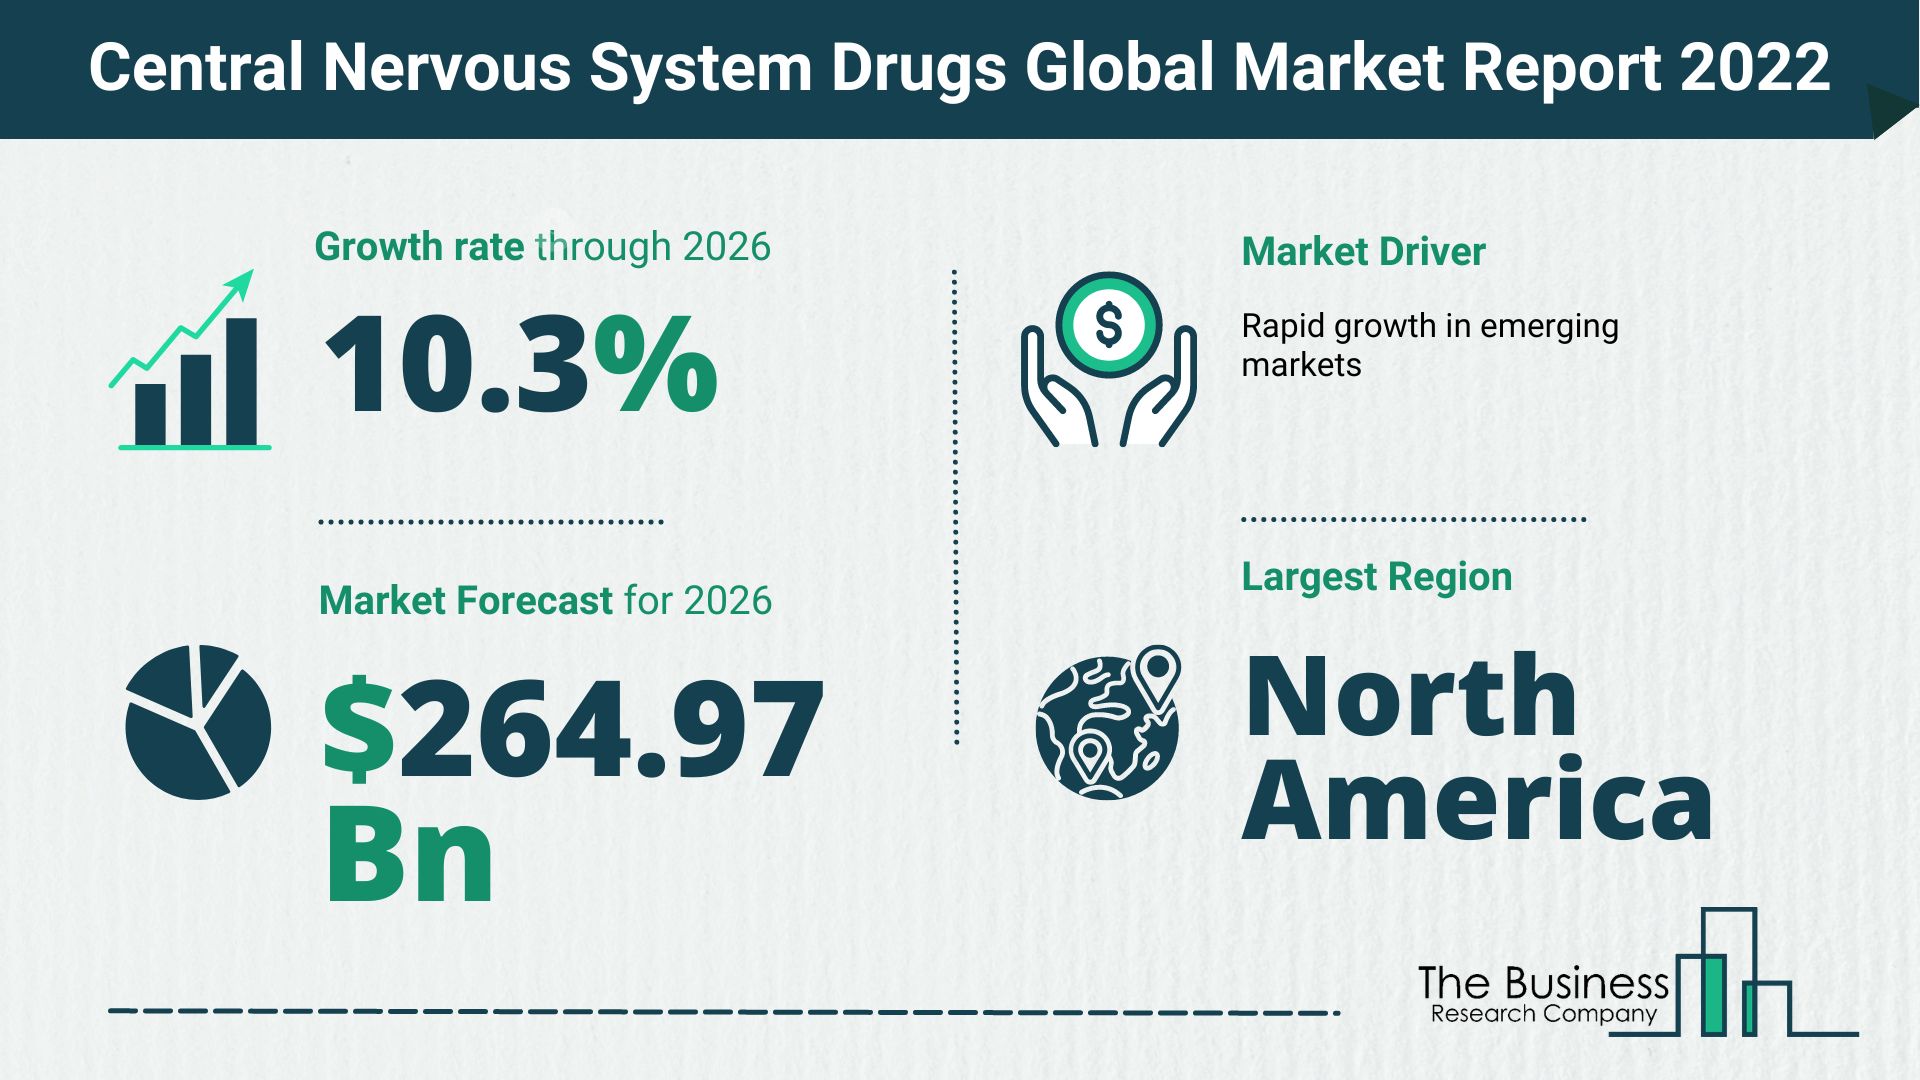 What Is The Central Nervous System (CNS) Drugs Market Overview In 2022?